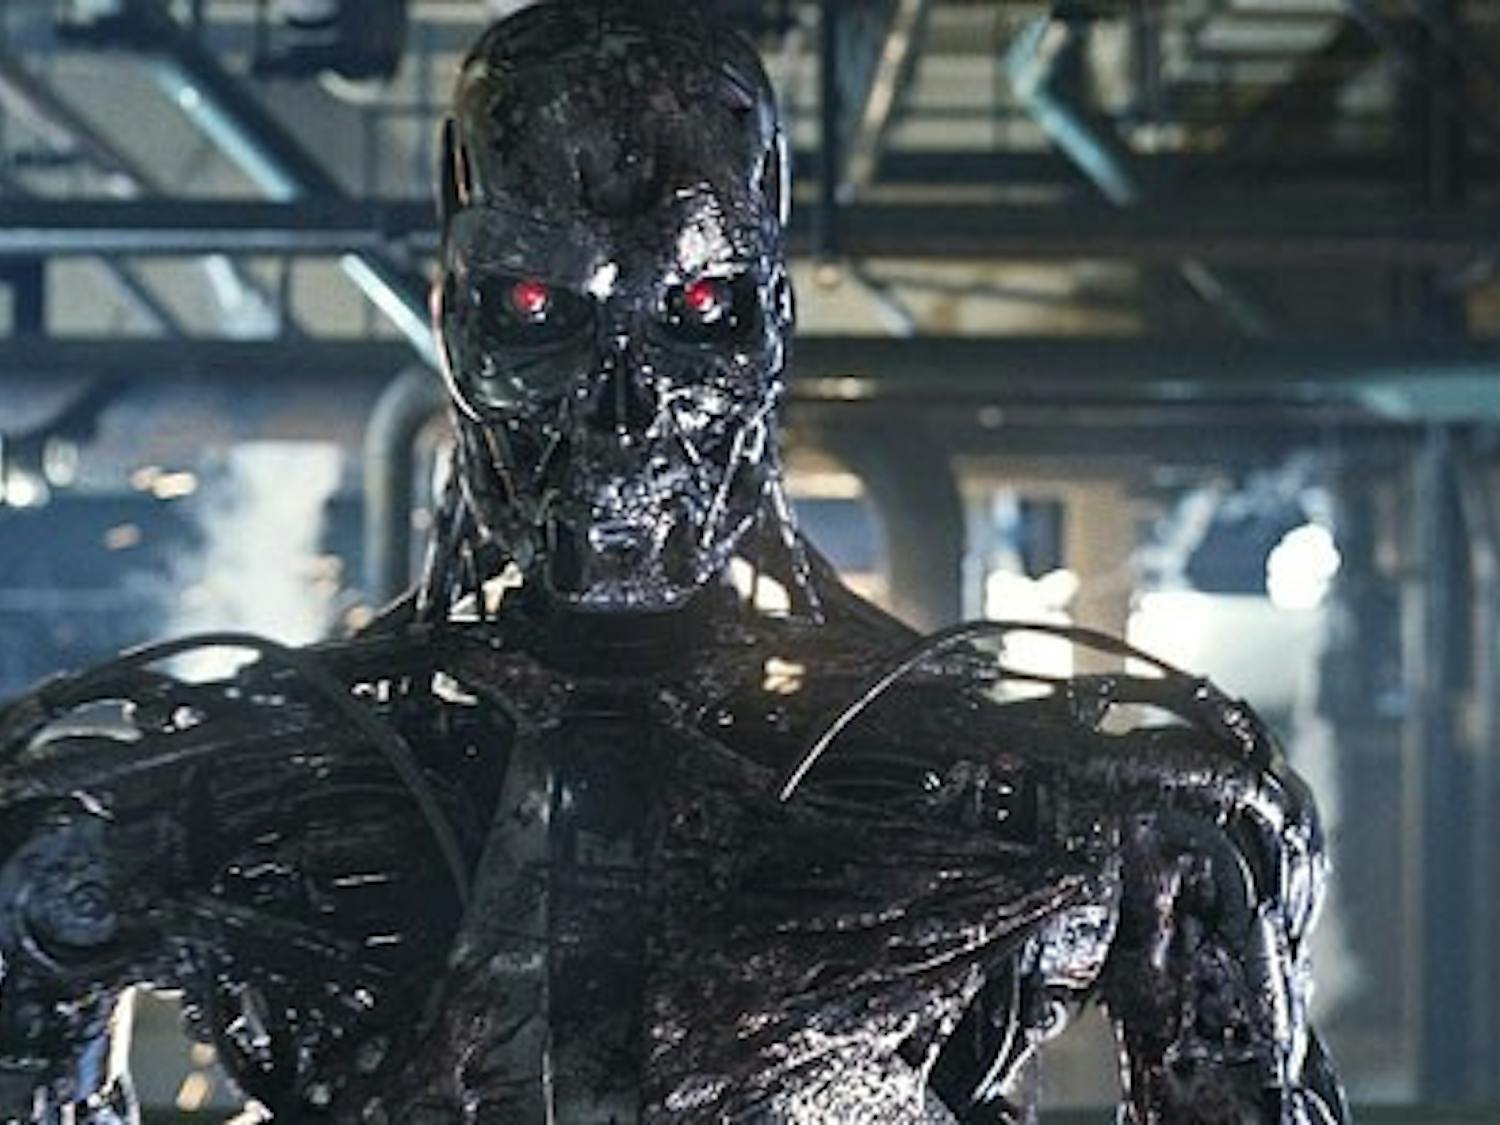 T-800 Terminator in "Terminator Salvation," which opened May 21.